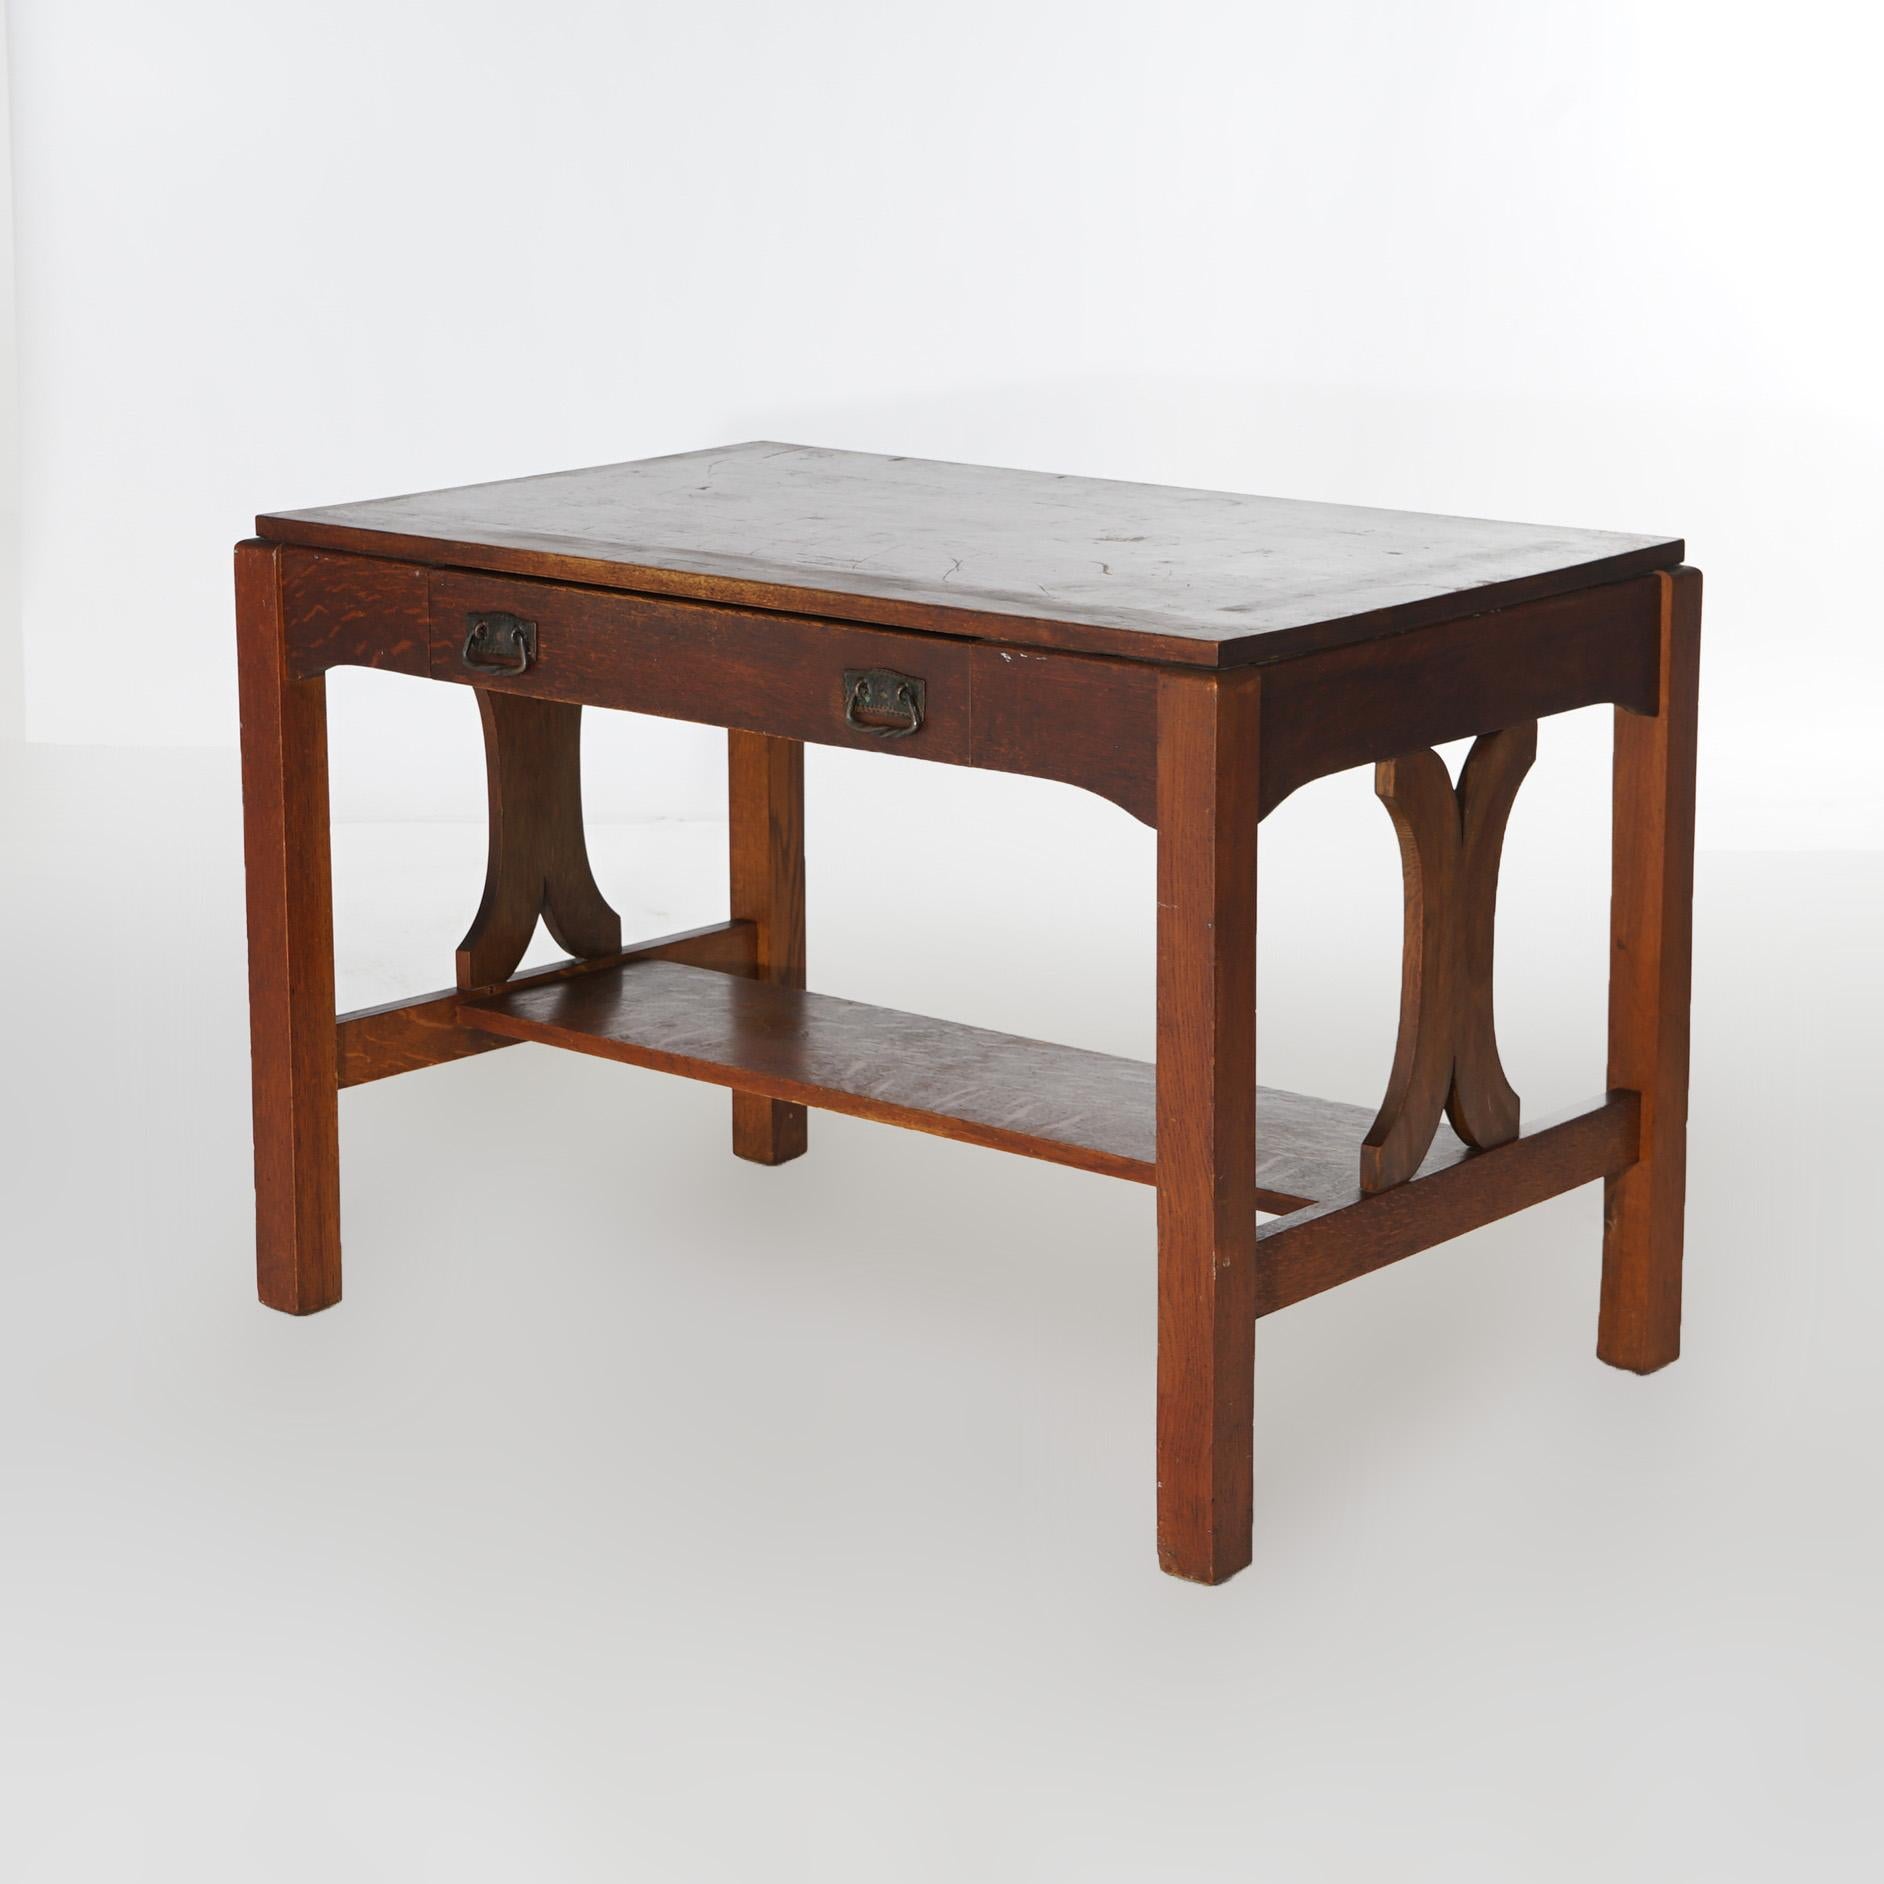 An antique Arts and Crafts Mission library table in the manner of Stickley offers quarter sawn oak construction with two drawers raised on trestle legs with stylized slat sides and lower shelf, c1910

Measures - 29.5